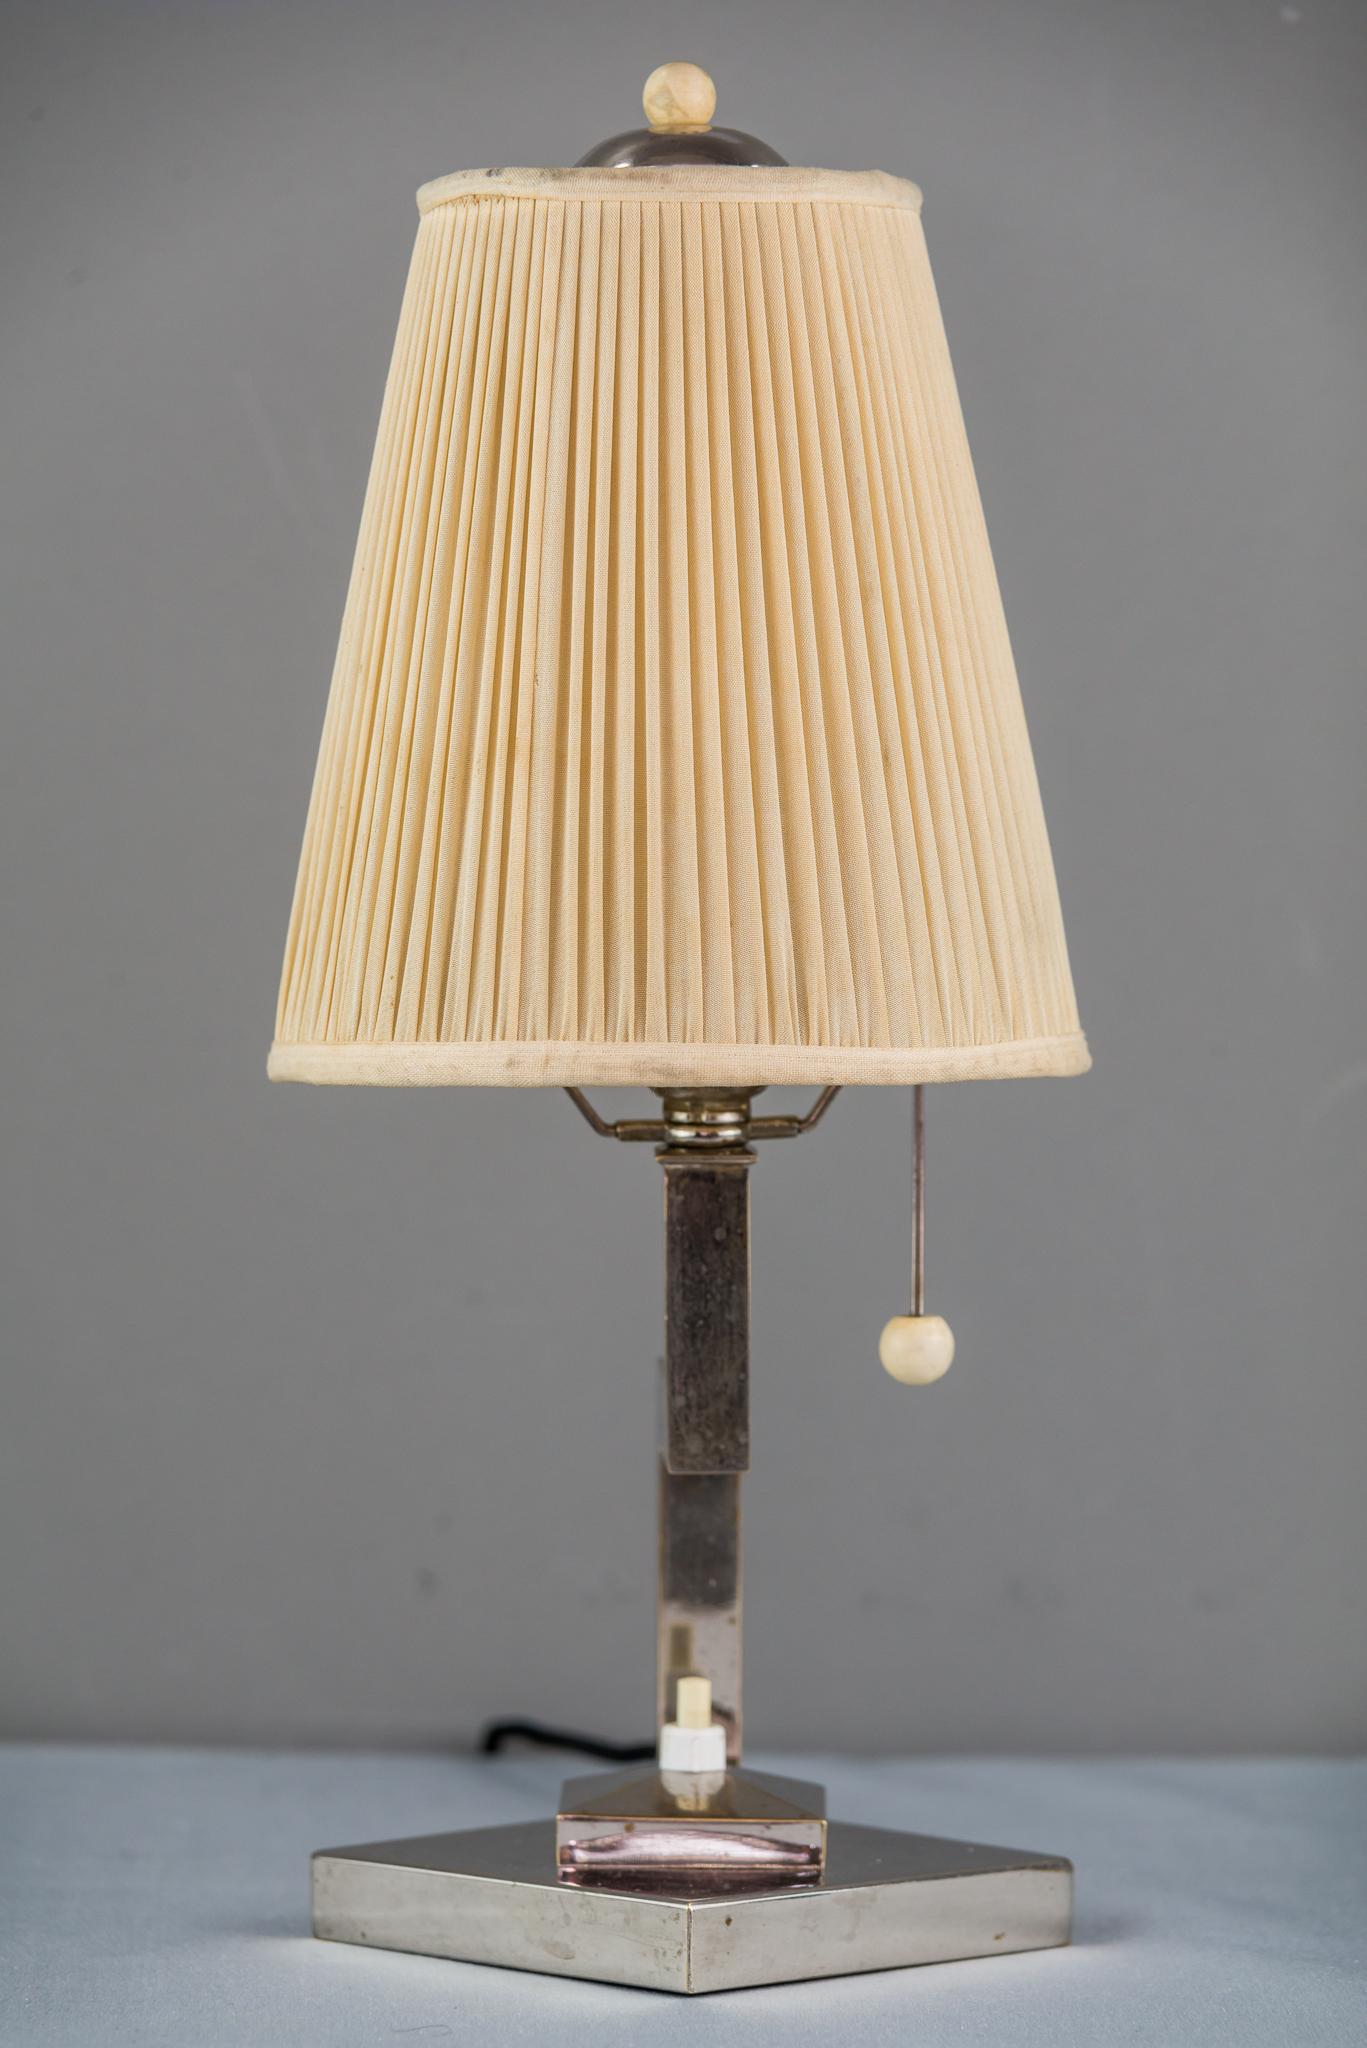 Early 20th Century Art Deco Table Lamp Nickel-Plated with Original Shade, circa 1920s